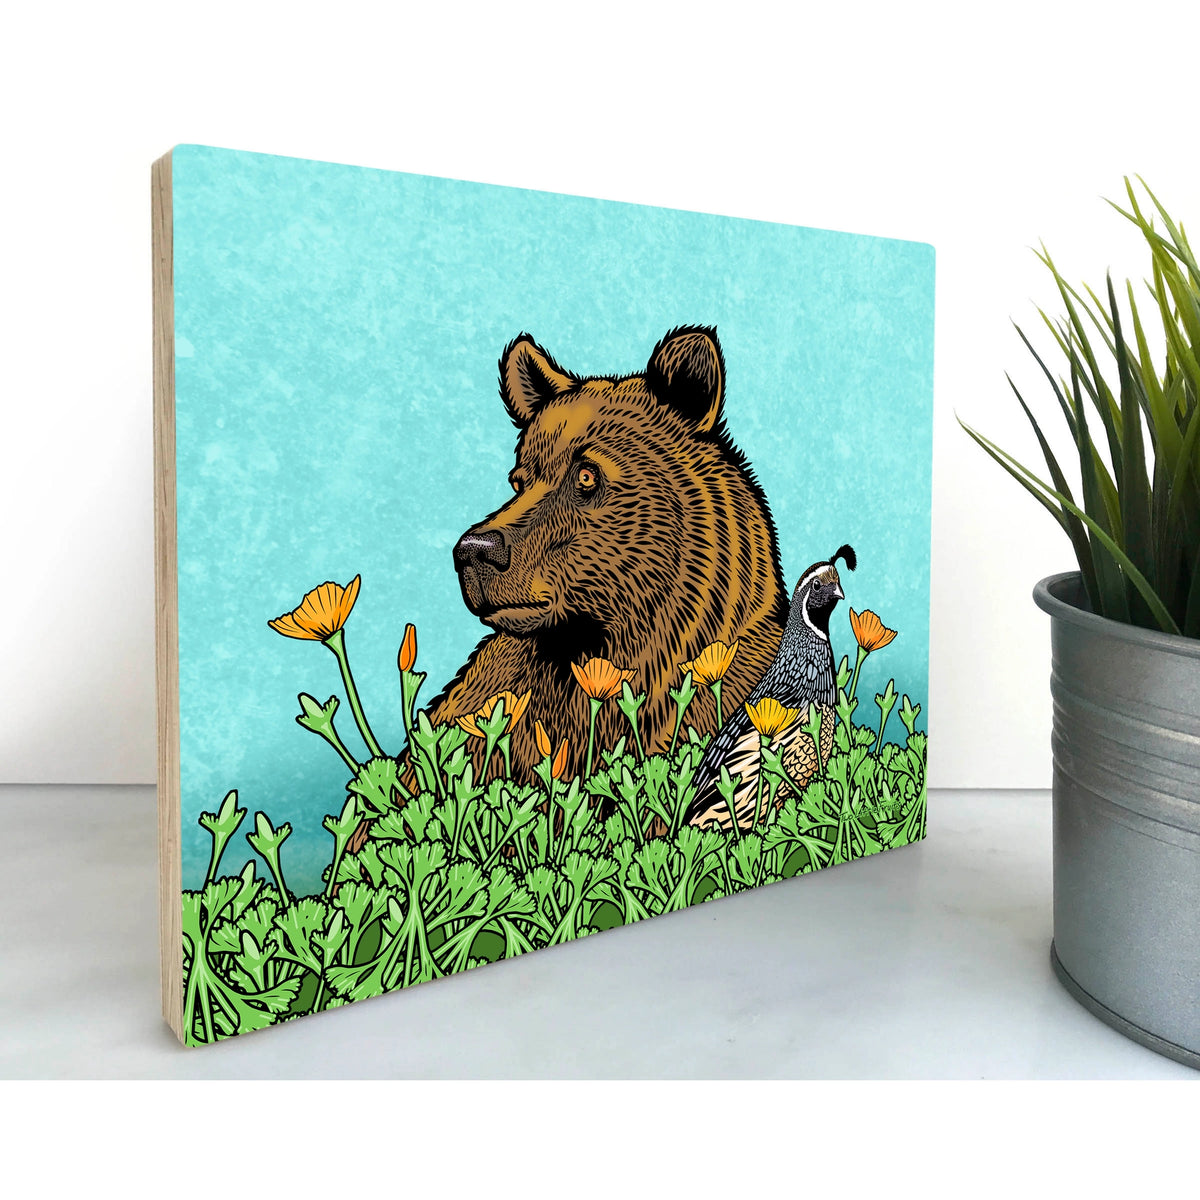 Grizzly Bear and Quail Wall Art on Wood